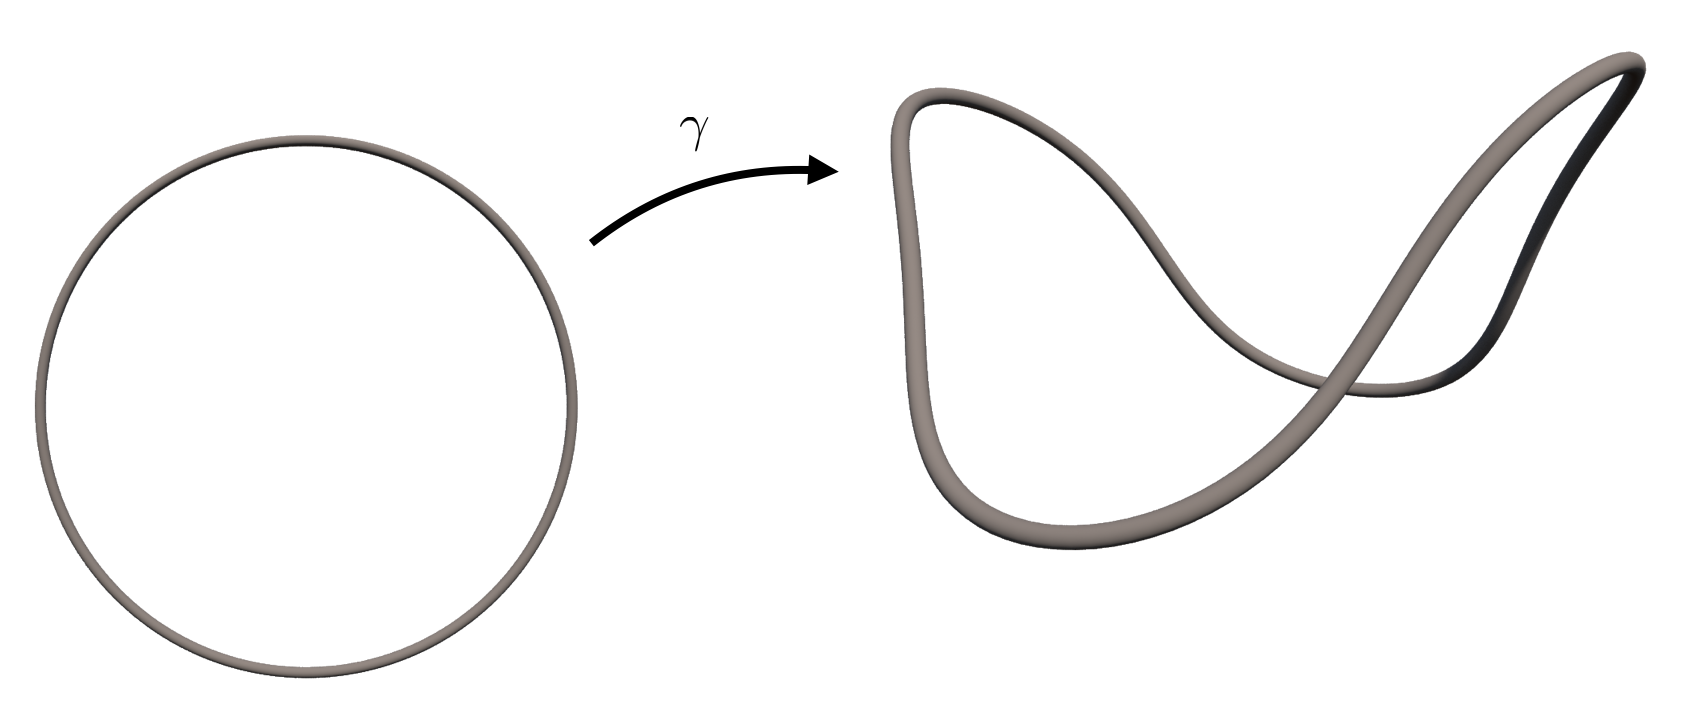 closed-parametrized-curve-smooth